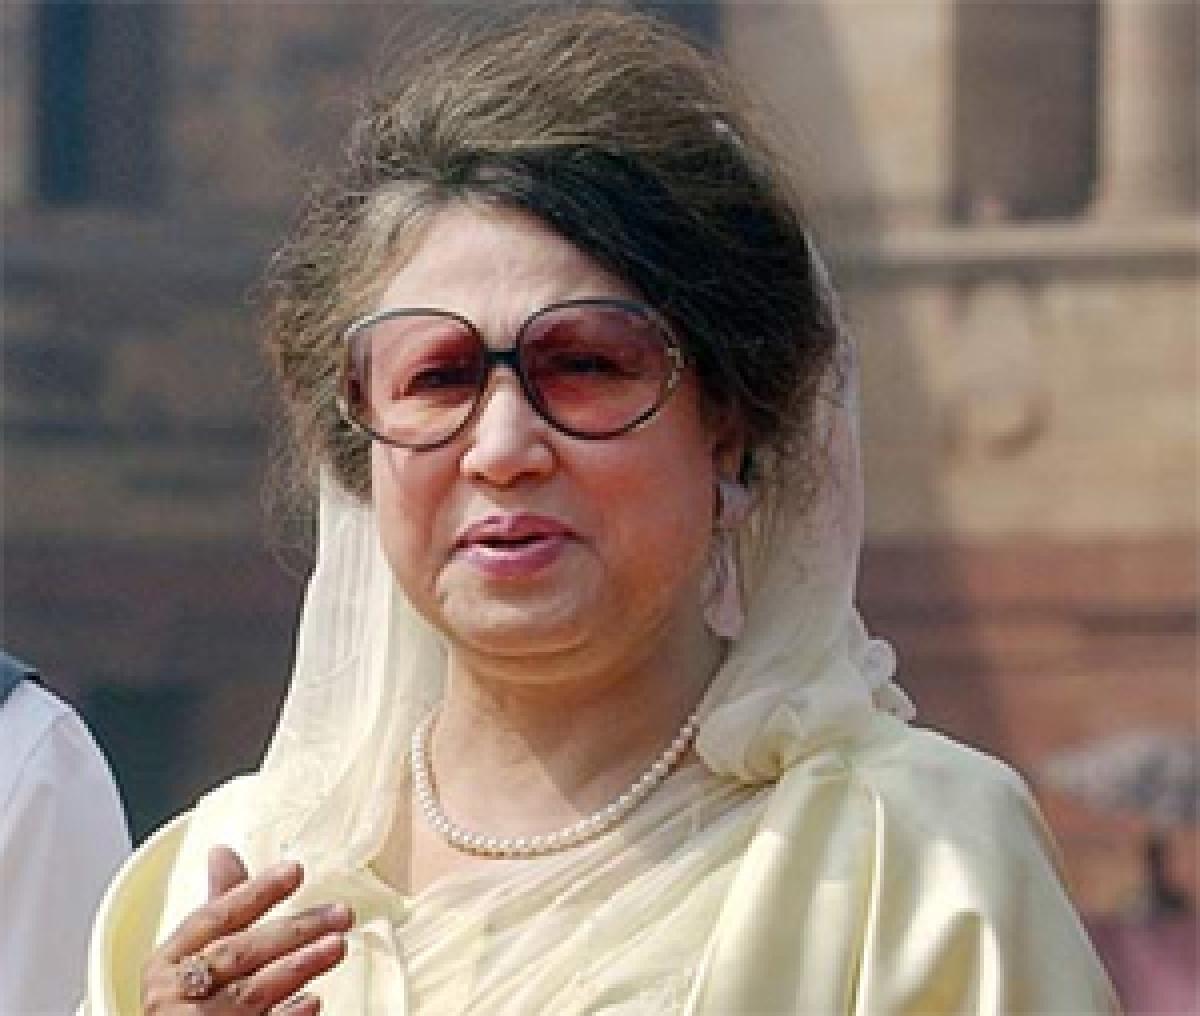 Khaleda Zia to appear before court for graft trial